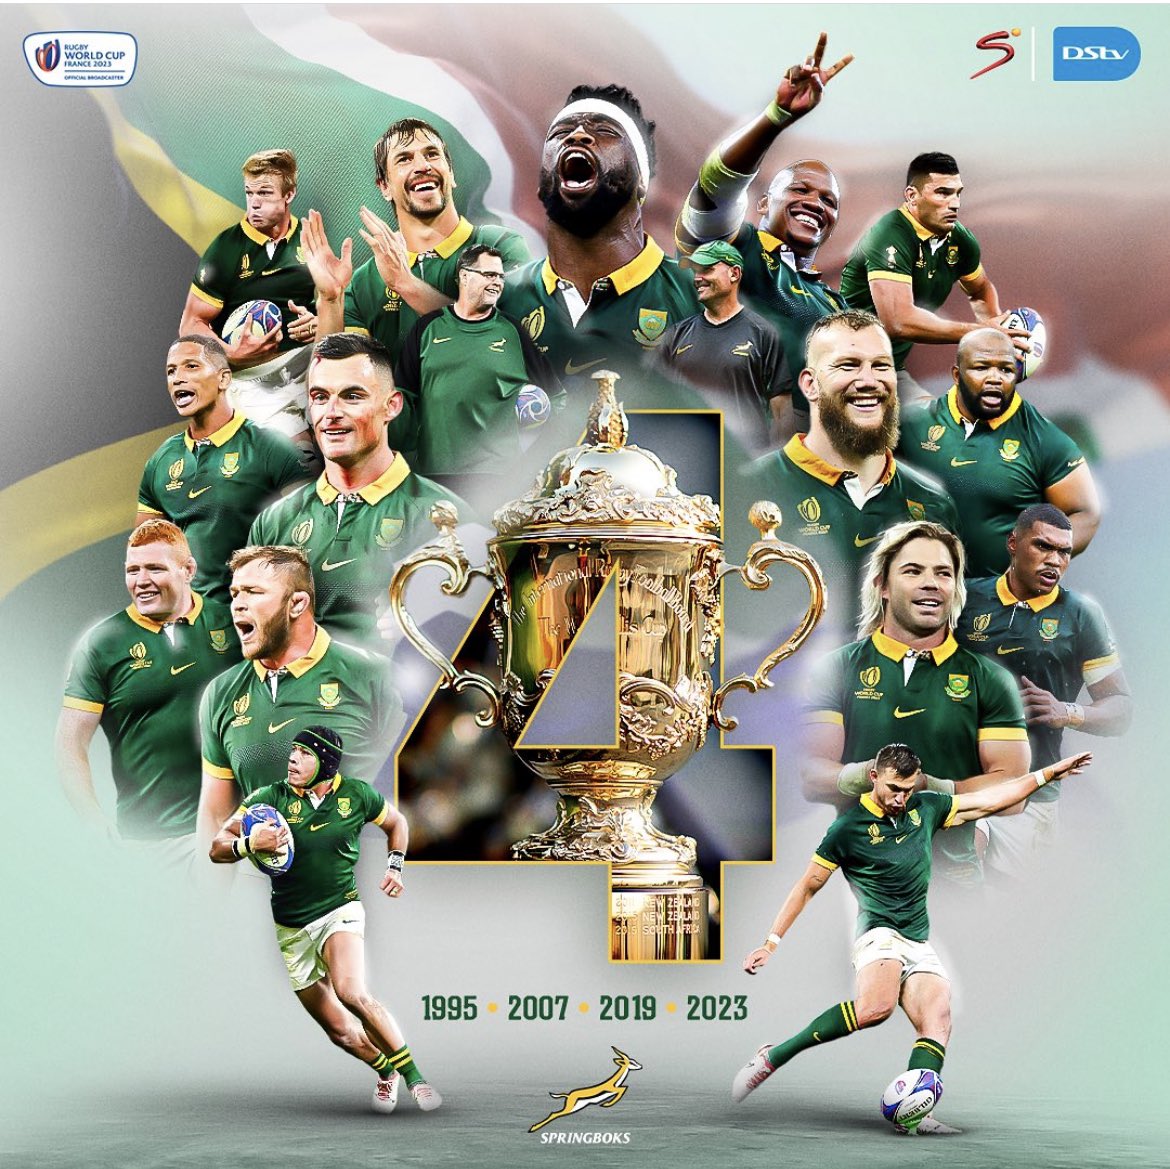 It was right there all along: 4 our kids 4 those who've done it before us 4 our families 4 each other 4 South Africa Yes. 4. 4 time RWC champions 🇿🇦 c/o @theankletap #RWC2023Final